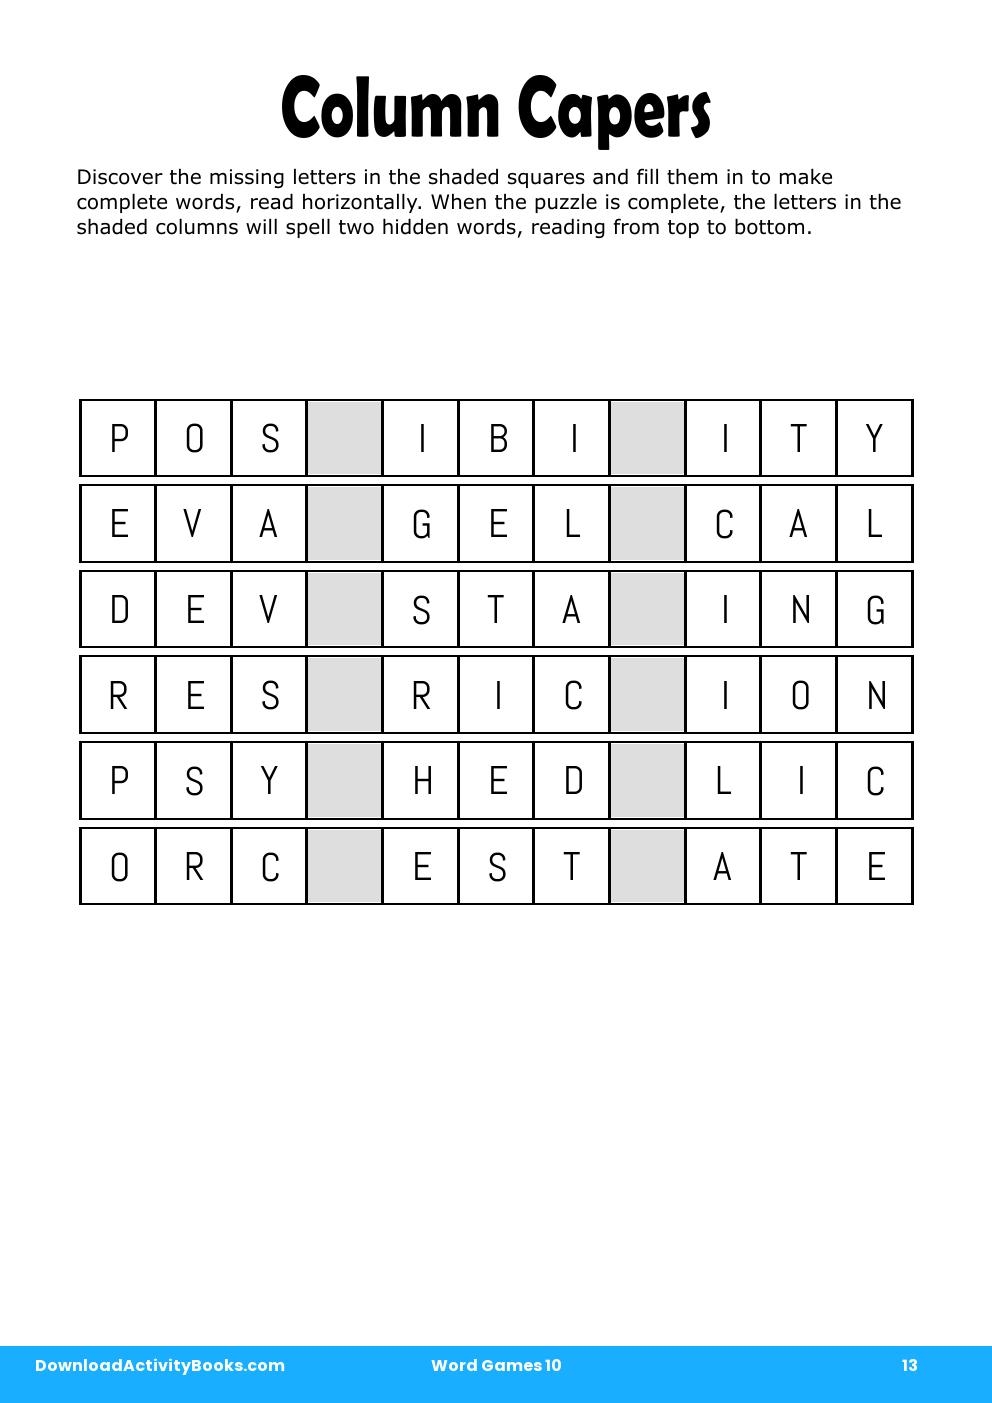 Column Capers in Word Games 10